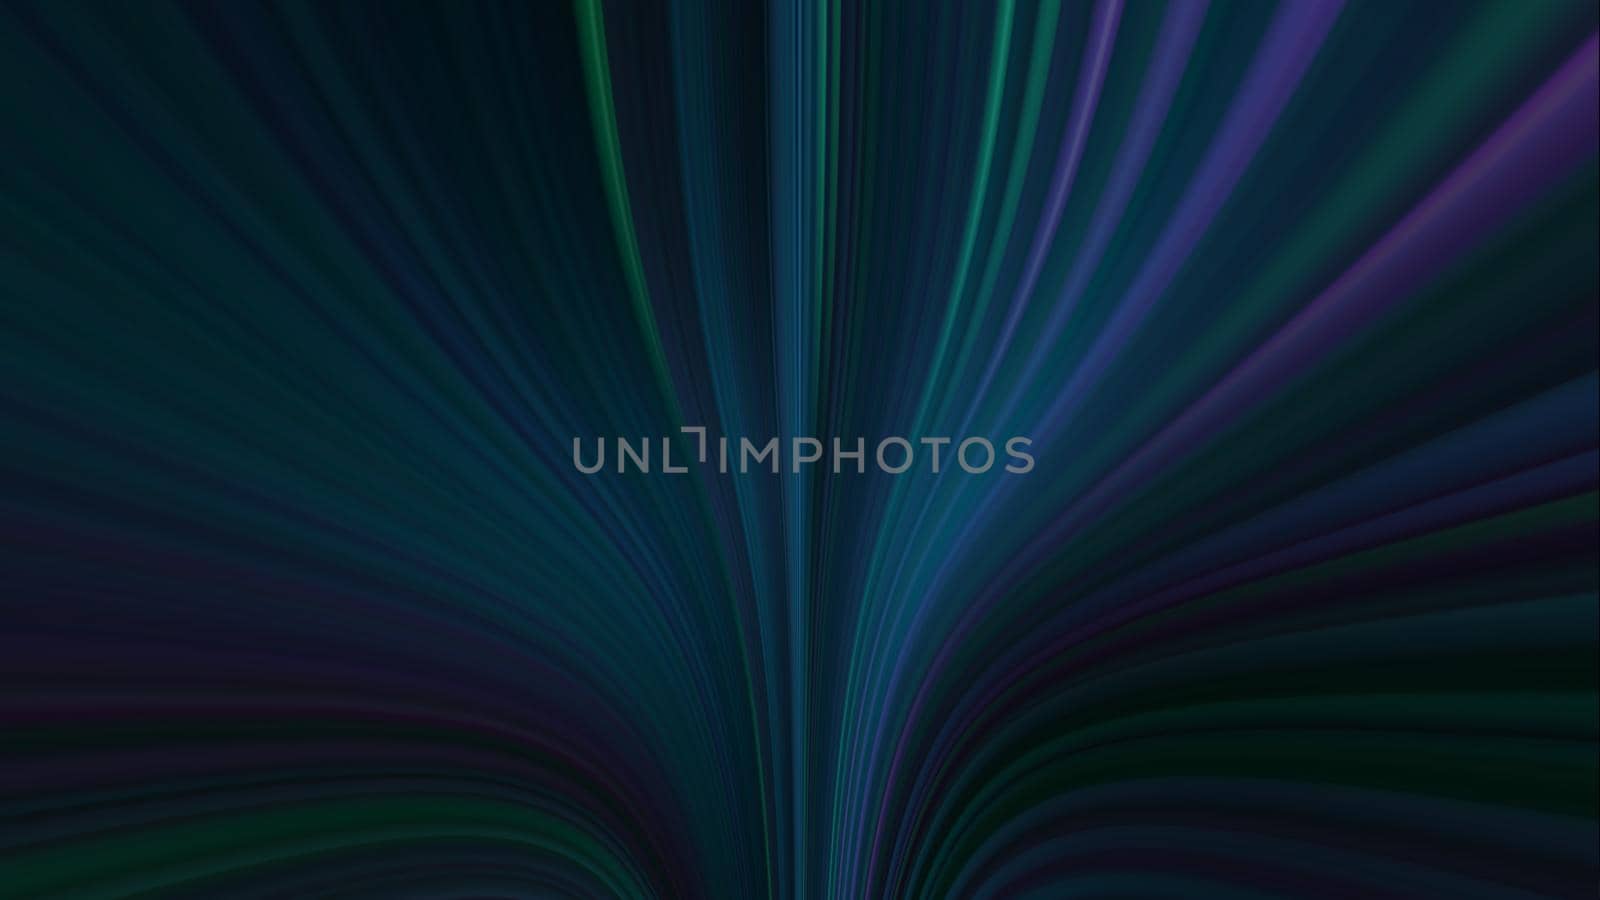 Abstract linear textured multicolored background. For the design